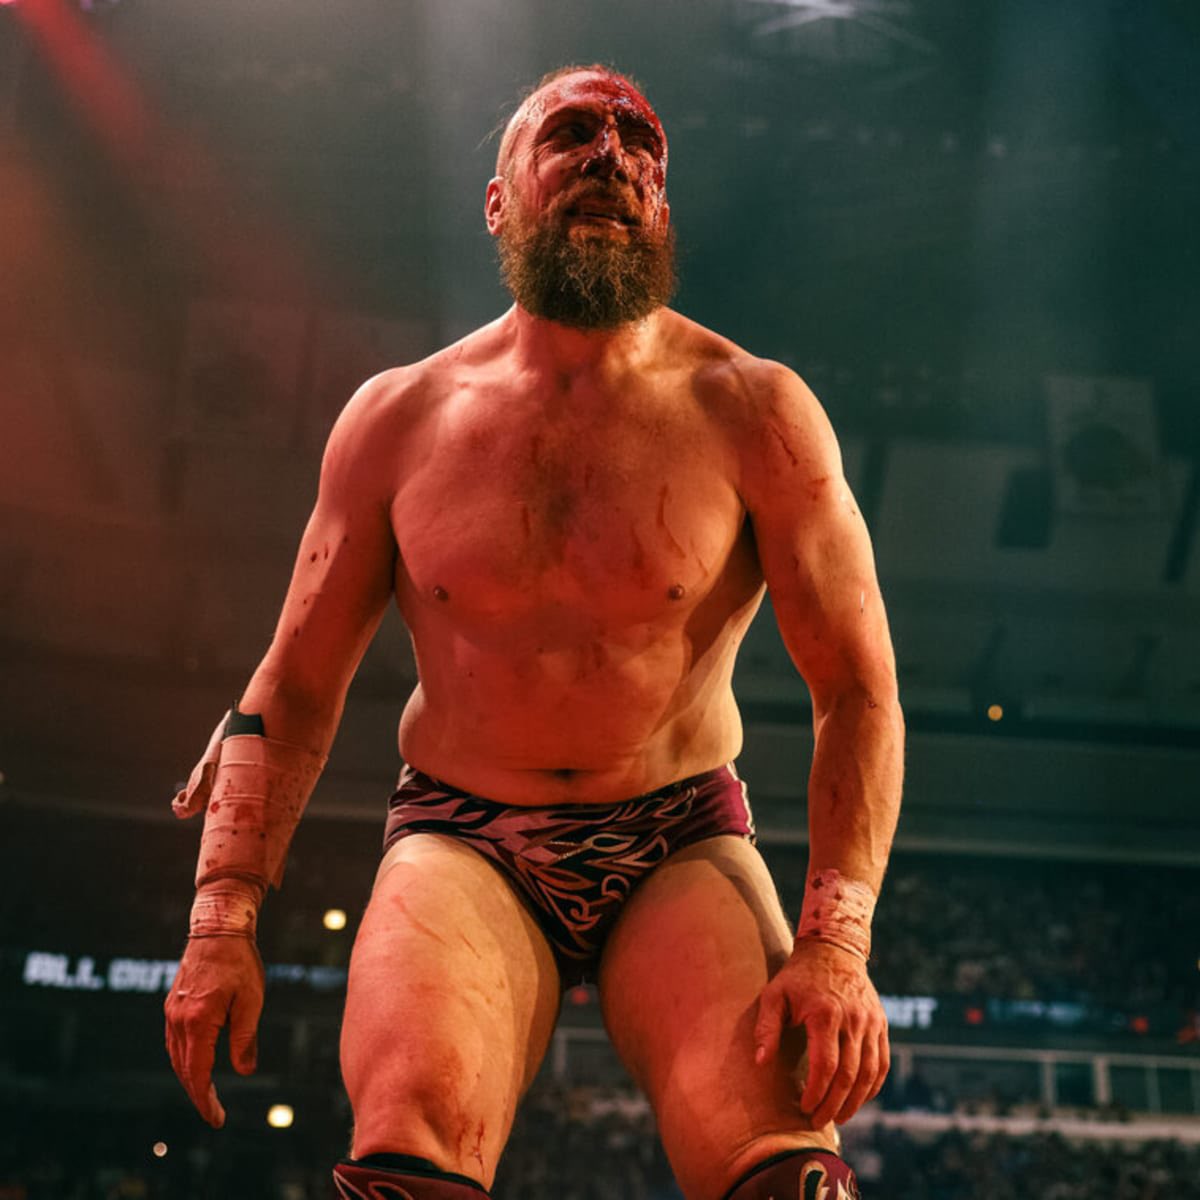 Bryan Danielson appreciation post.

Such an amazing, consistent & smart wrestler. This man loves Pro-Wrestling!